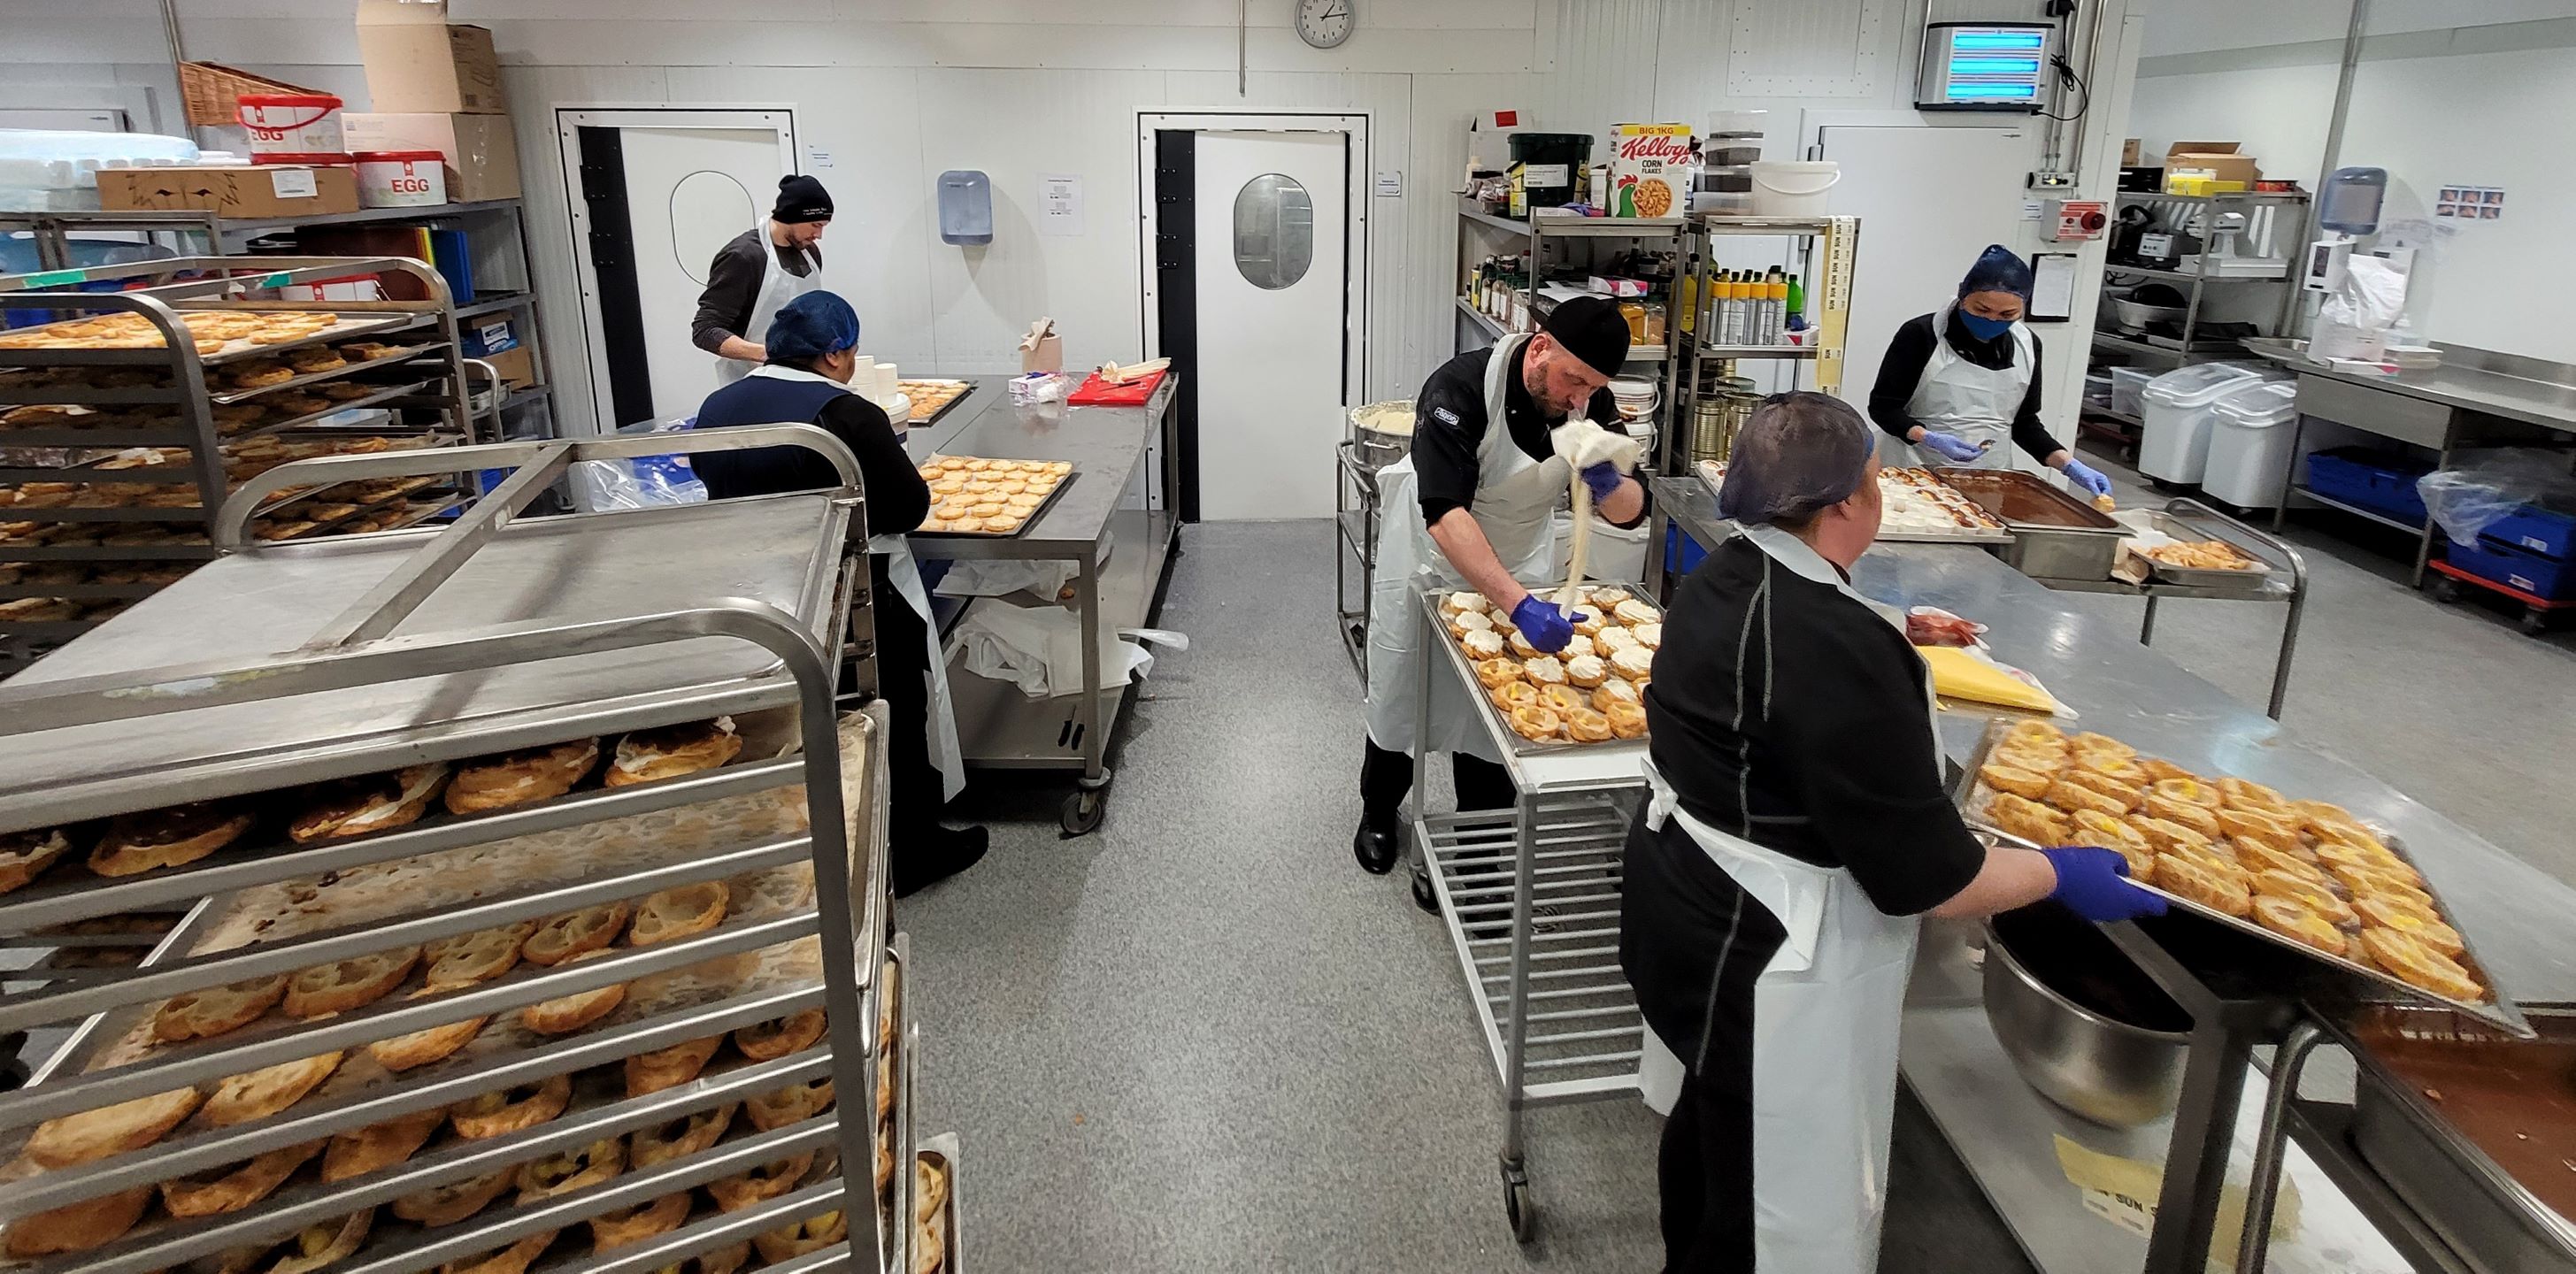 The Icelandair kitchen team made buns for flights on Bolludagur 2022. Here they are pictured in action in the kitchen.